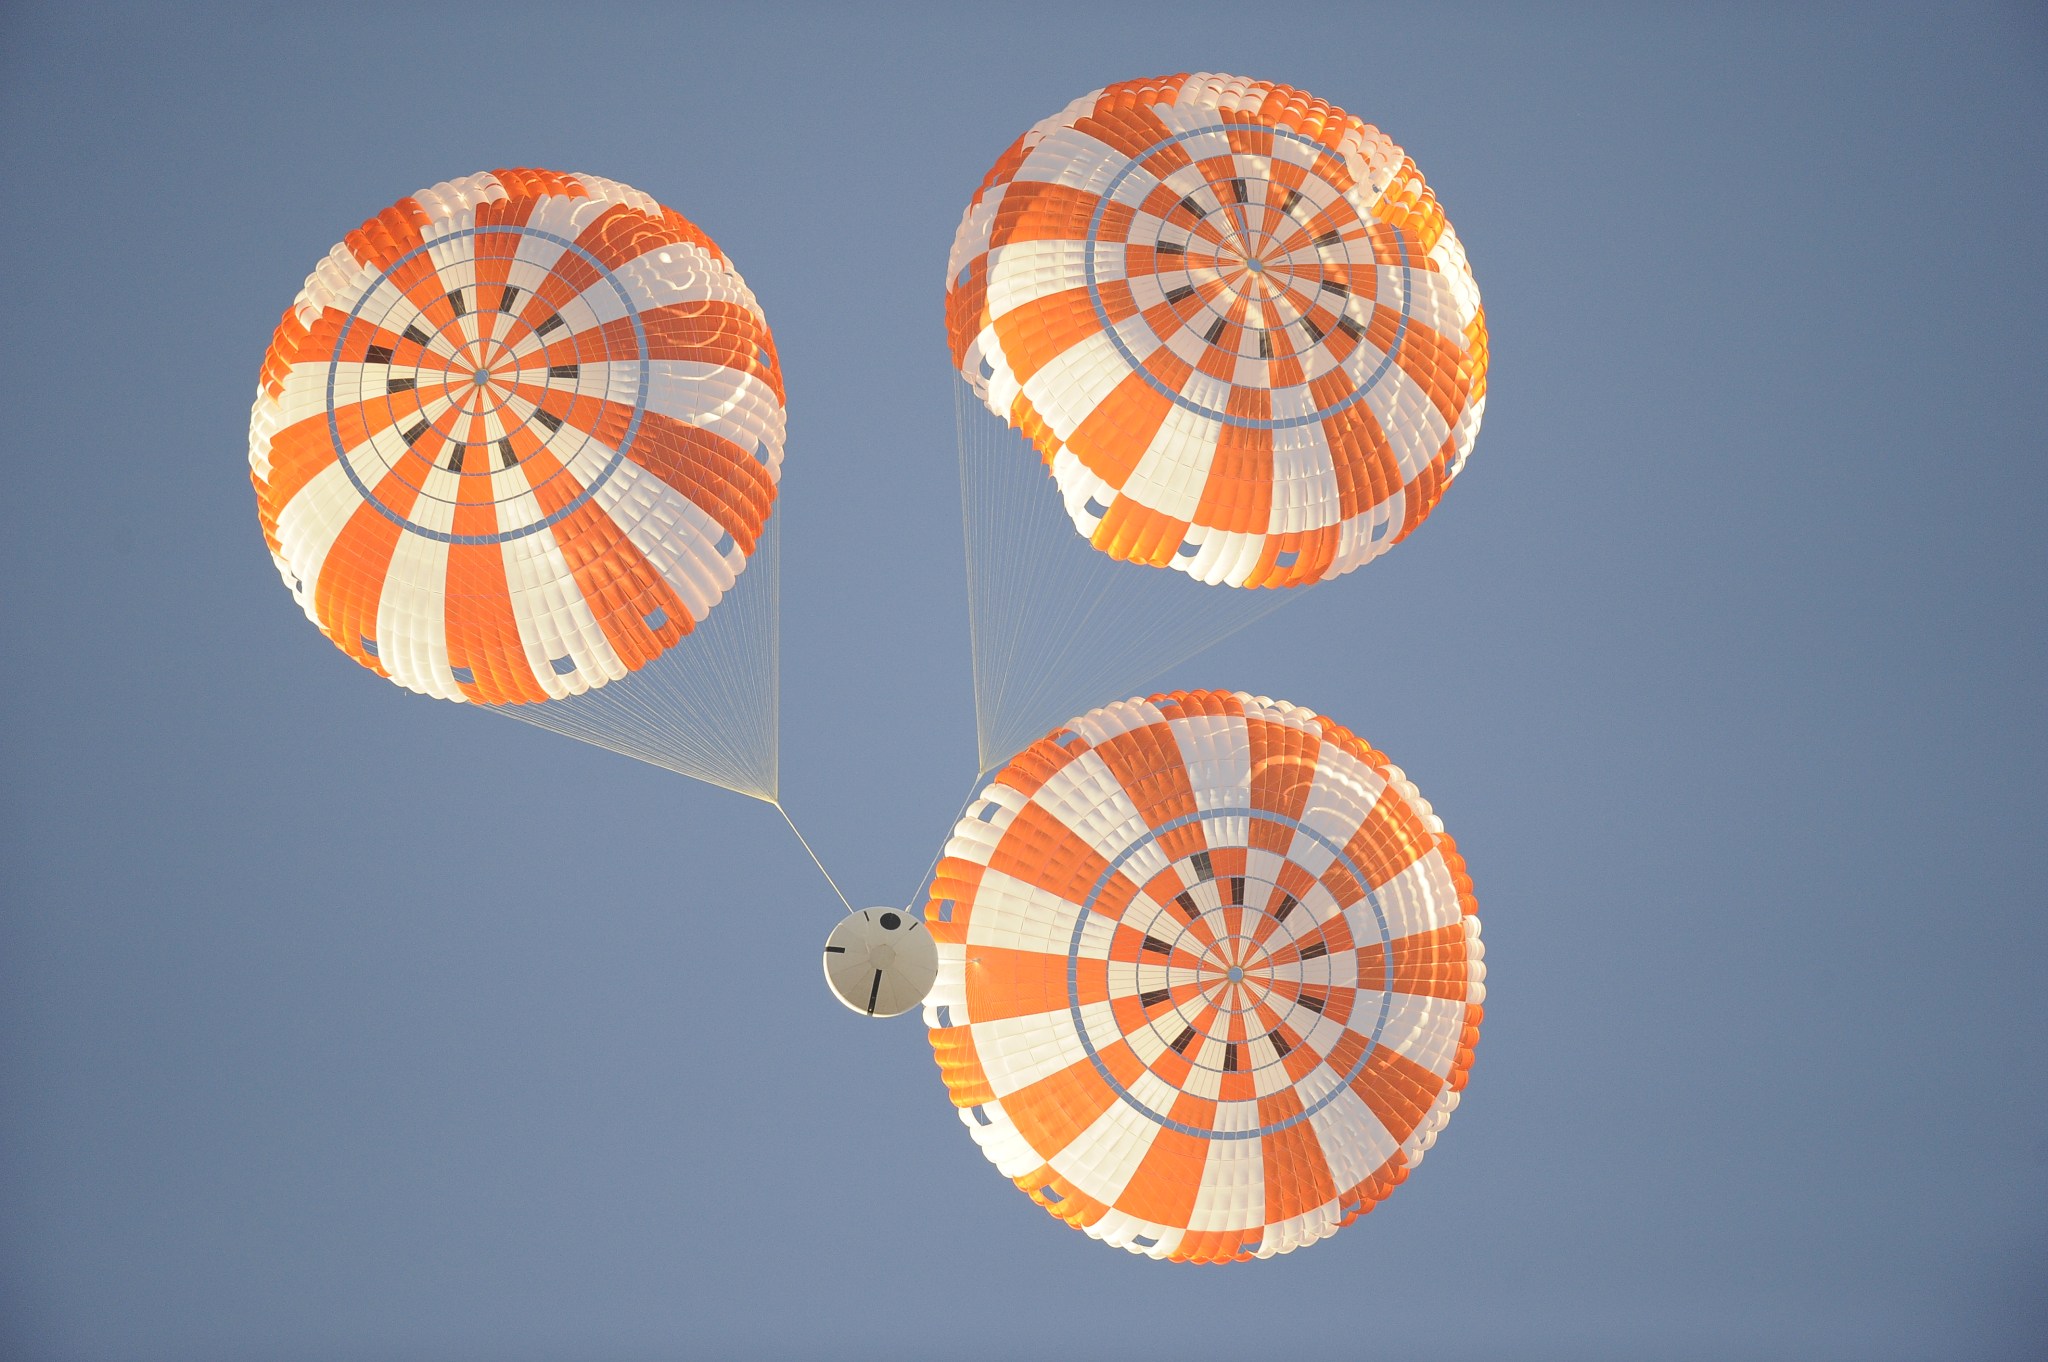 Orion Capsule Parachute Assembly System (CPAS) drop test using the Parachute Test Vehicle at the U.S. Army's Yuma Proving Ground